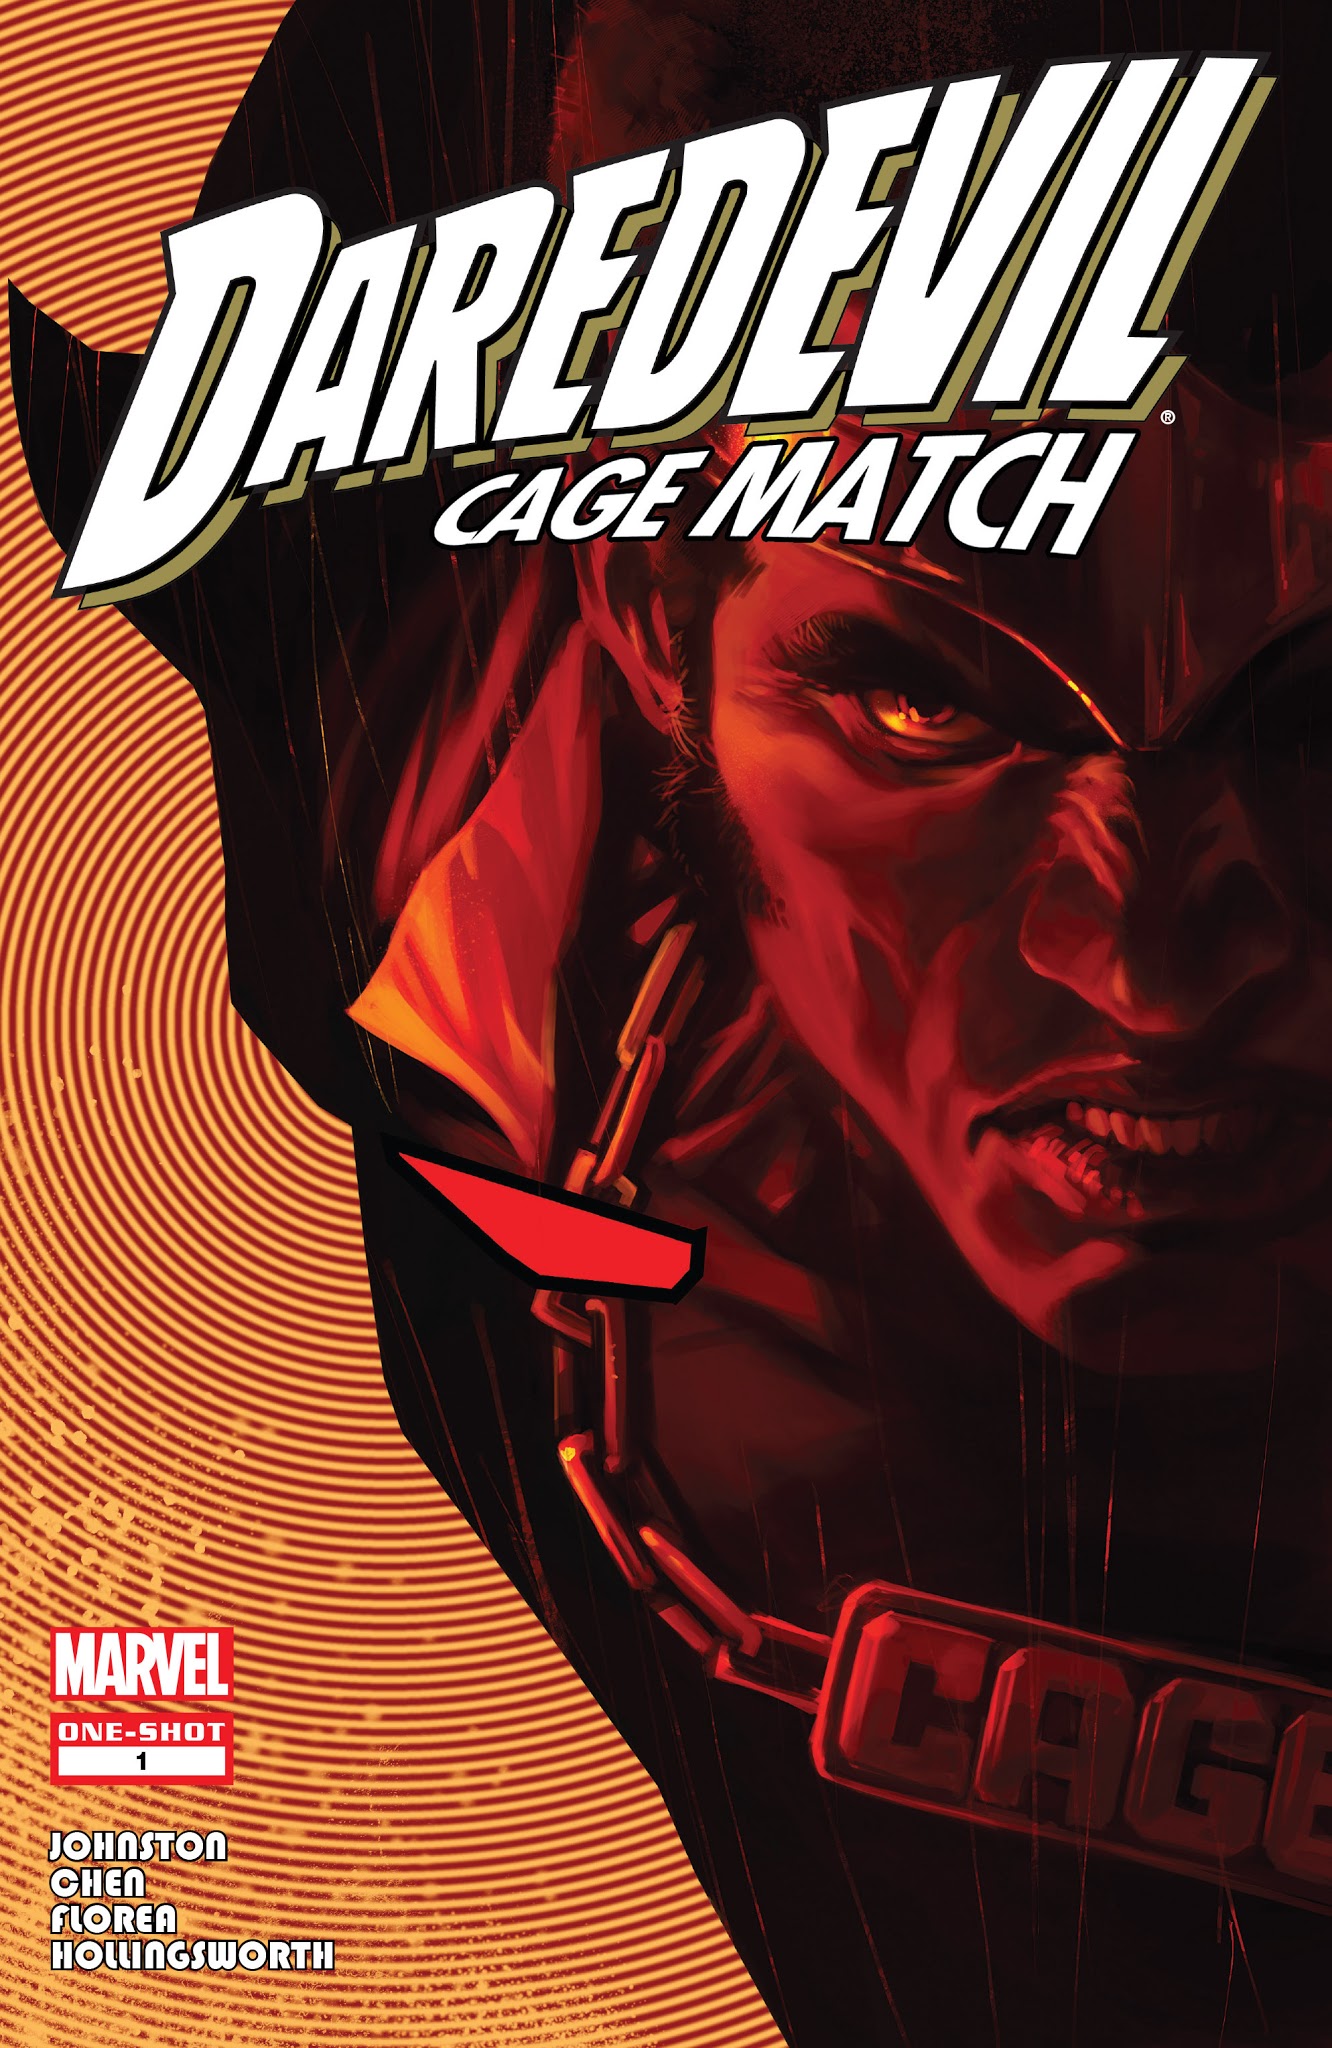 Read online Daredevil: Cage Match comic -  Issue # Full - 1